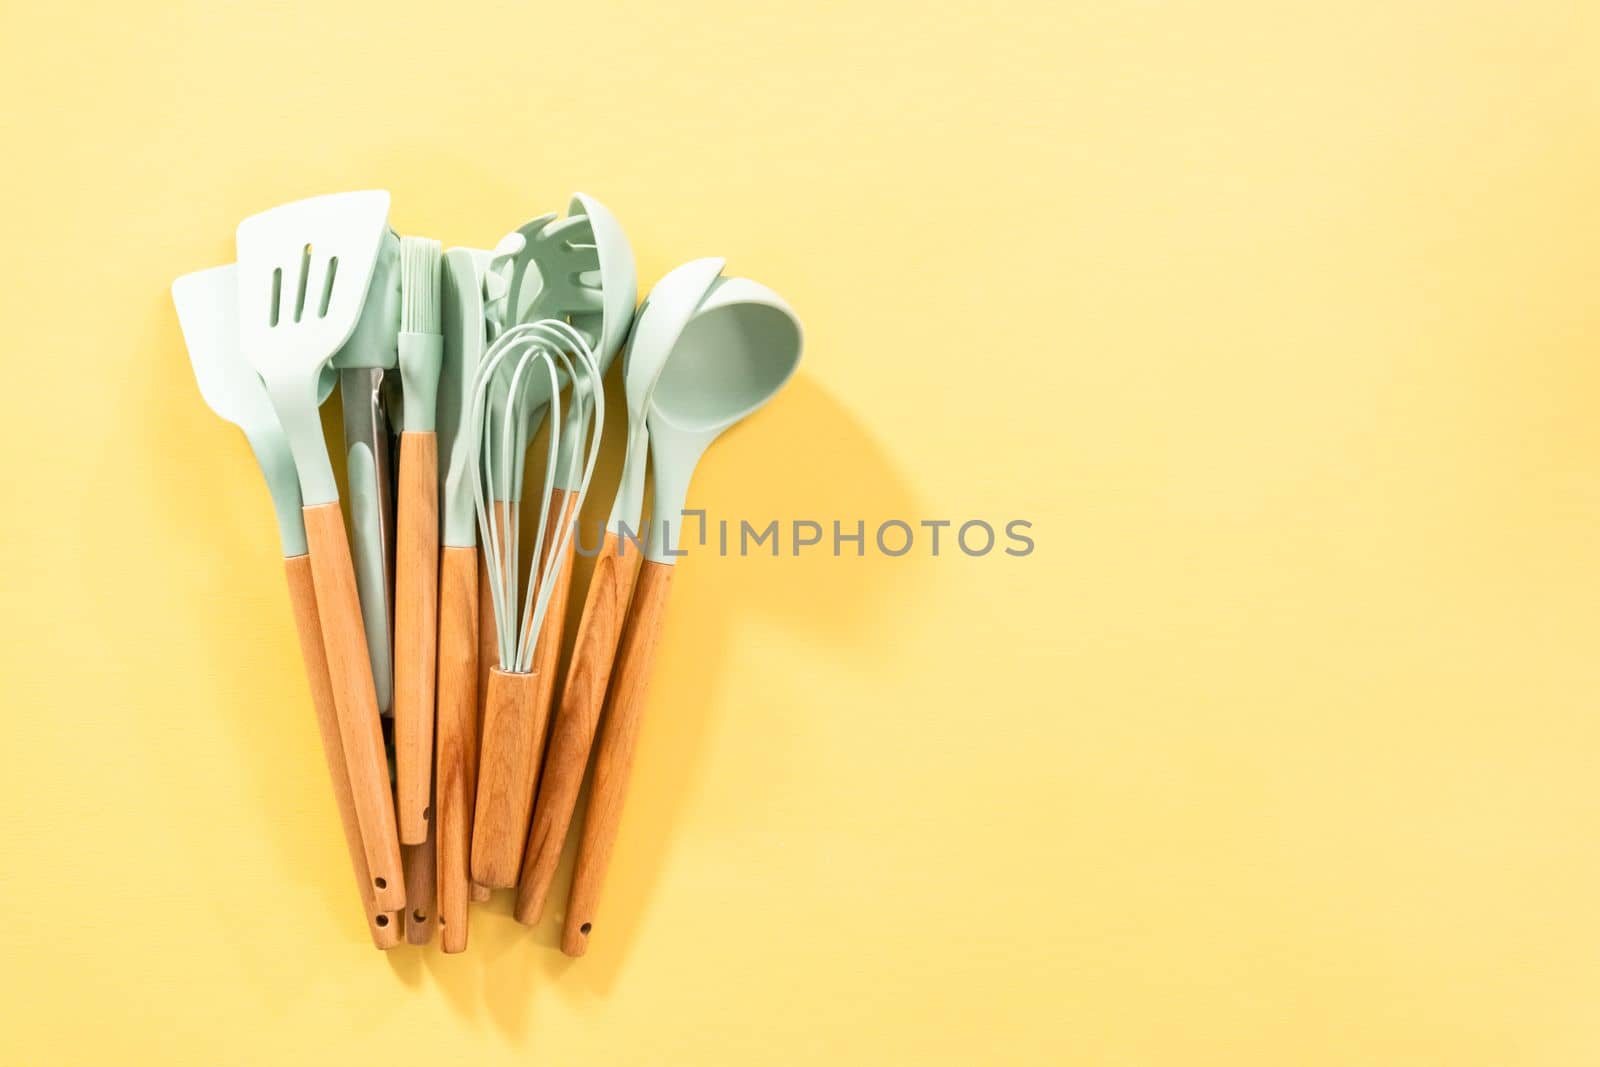 Flat lay. Silicone cooking utensils with wooden handle.